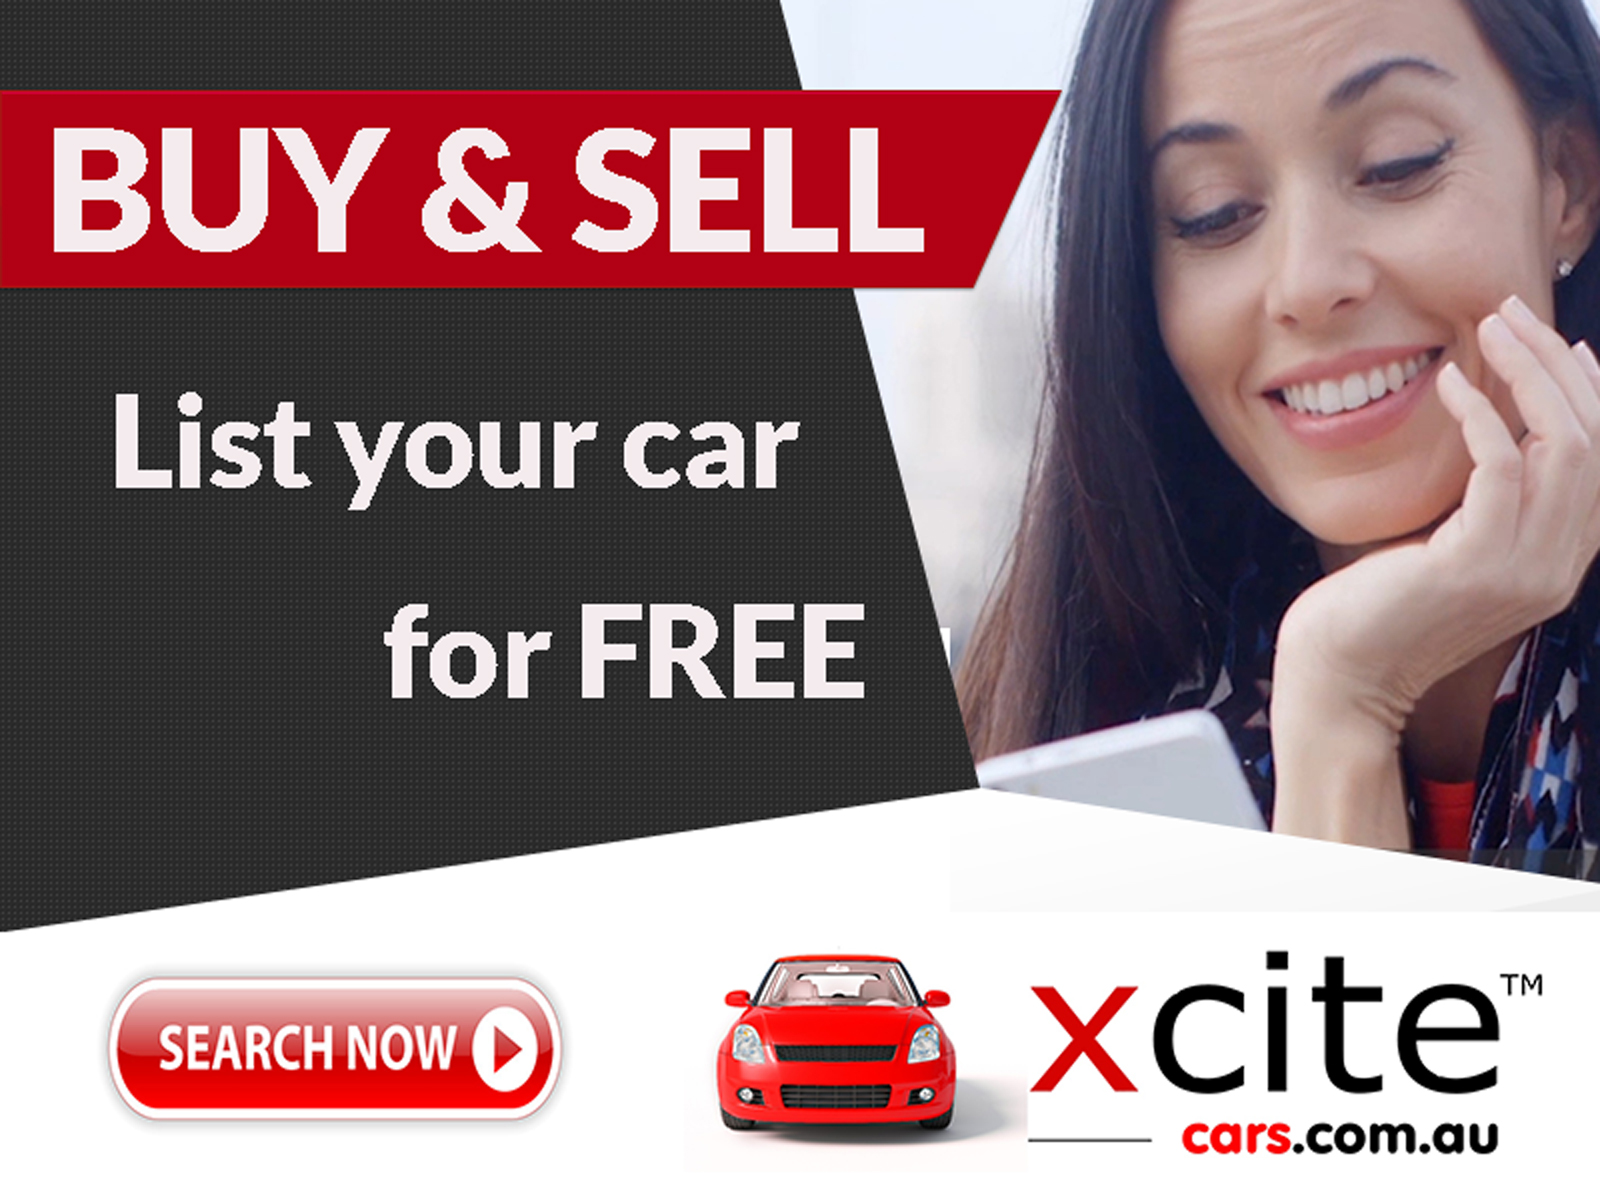 View our Xcite Cars Inventory